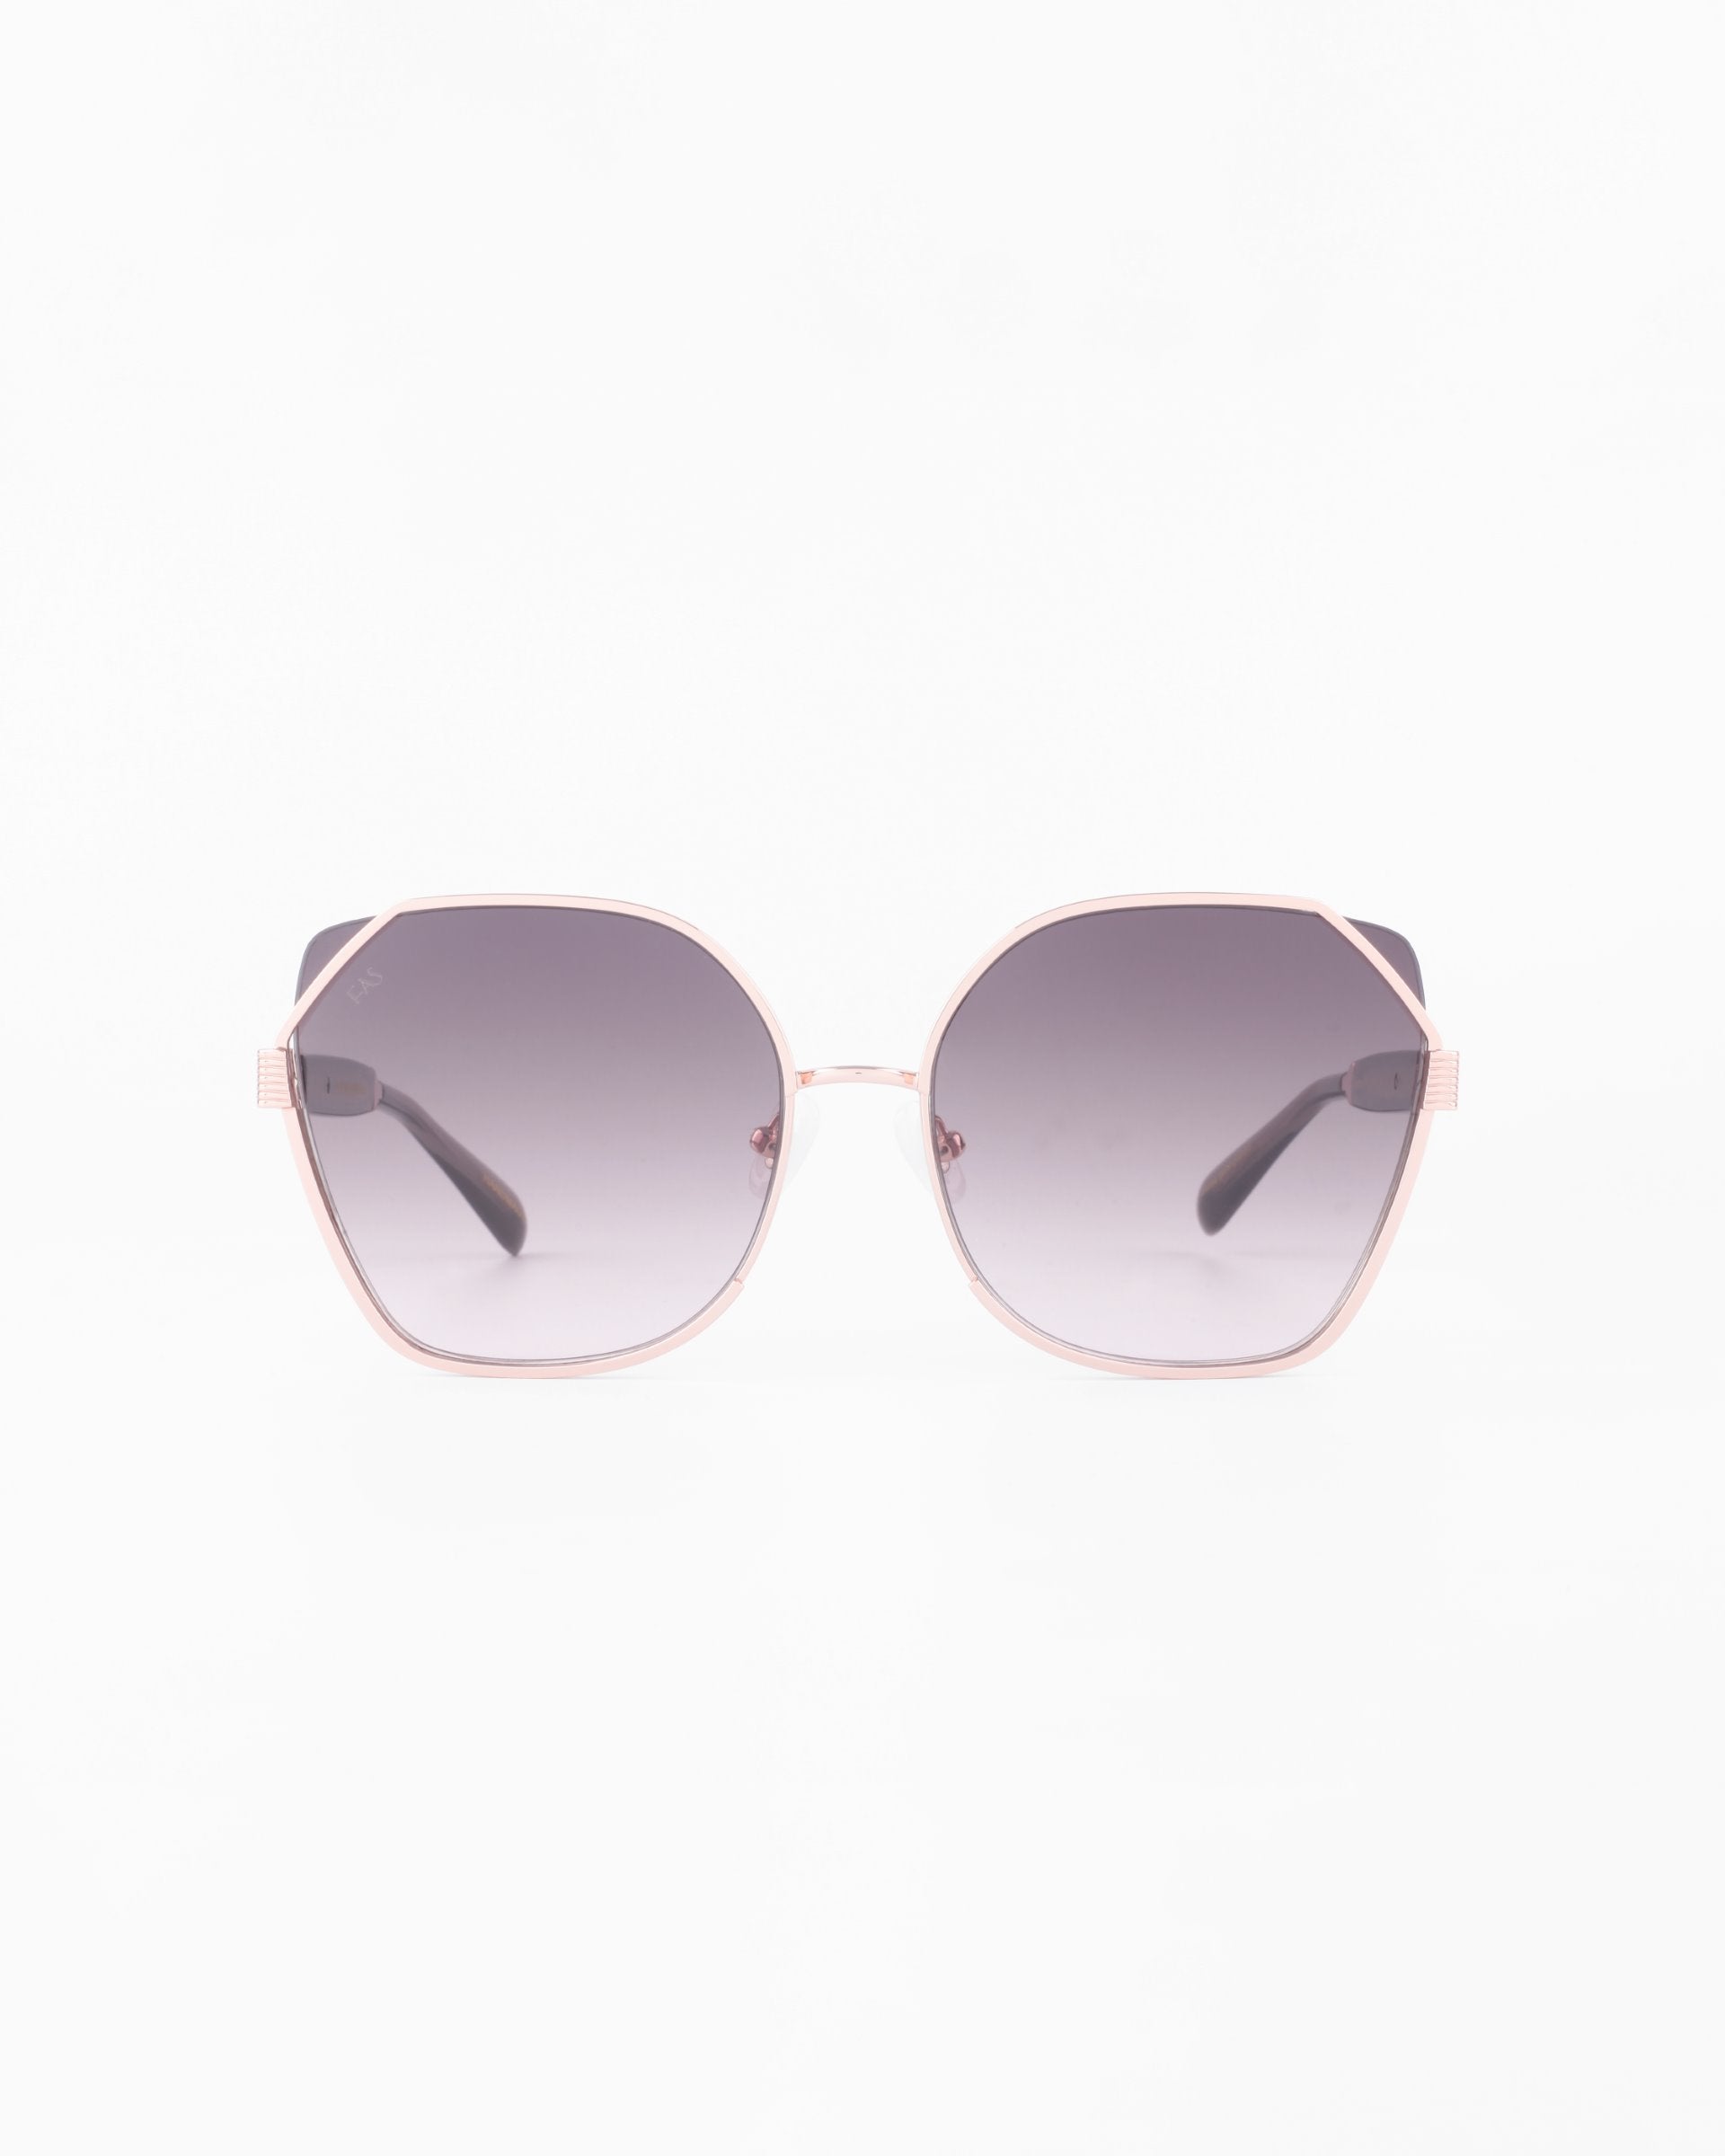 A pair of Montage sunglasses with large, round lenses and a thin, gold-plated stainless steel frame by For Art's Sake®. The gradient-tinted lenses offer 100% UVA & UVB protection, transitioning from a darker shade at the top to a lighter shade at the bottom. The arms are slender and black.